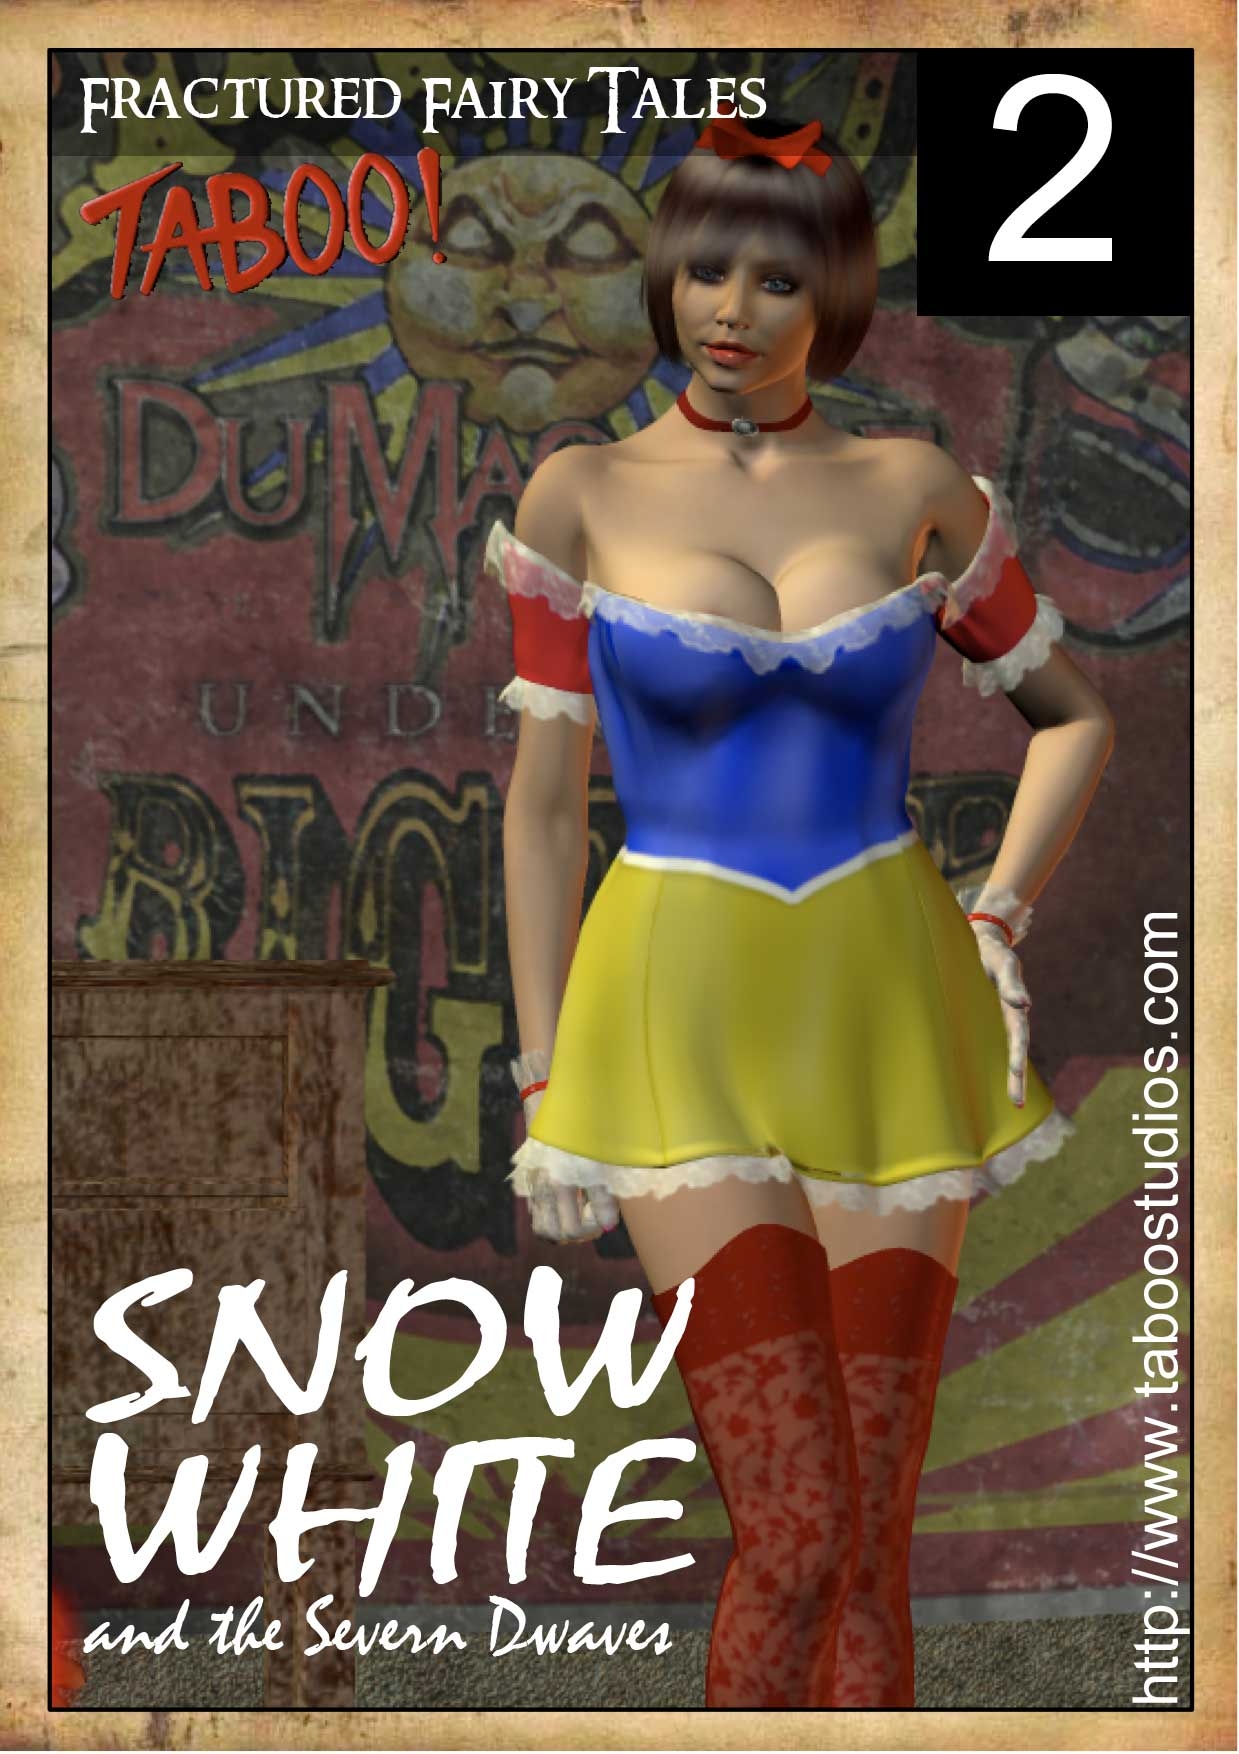 [Taboo Studios] Snow White and the Seven Dwarfs - Chapter 2 0